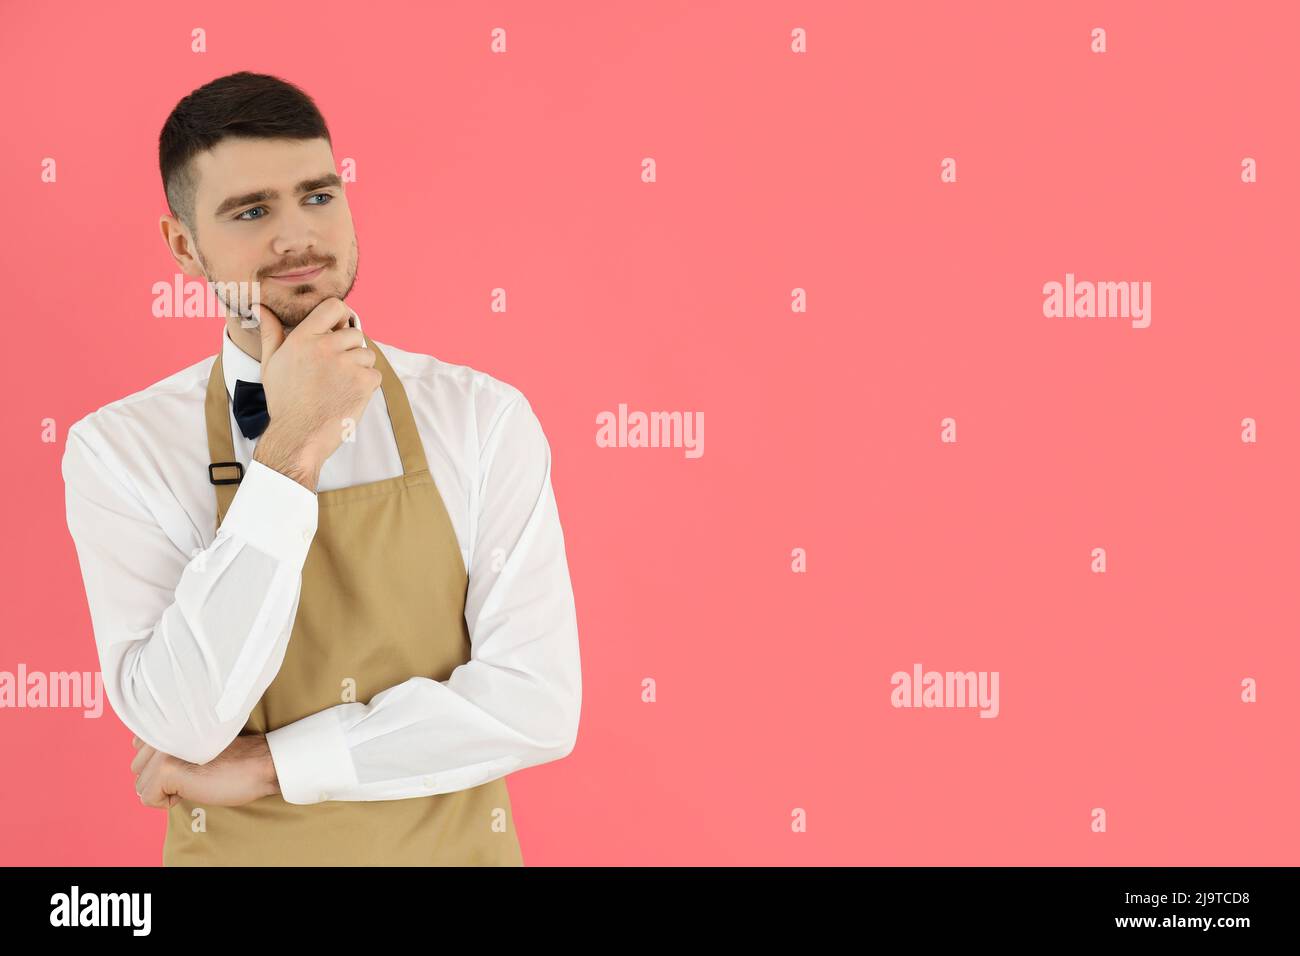 Concept of occupation, young waiter on pink background Stock Photo